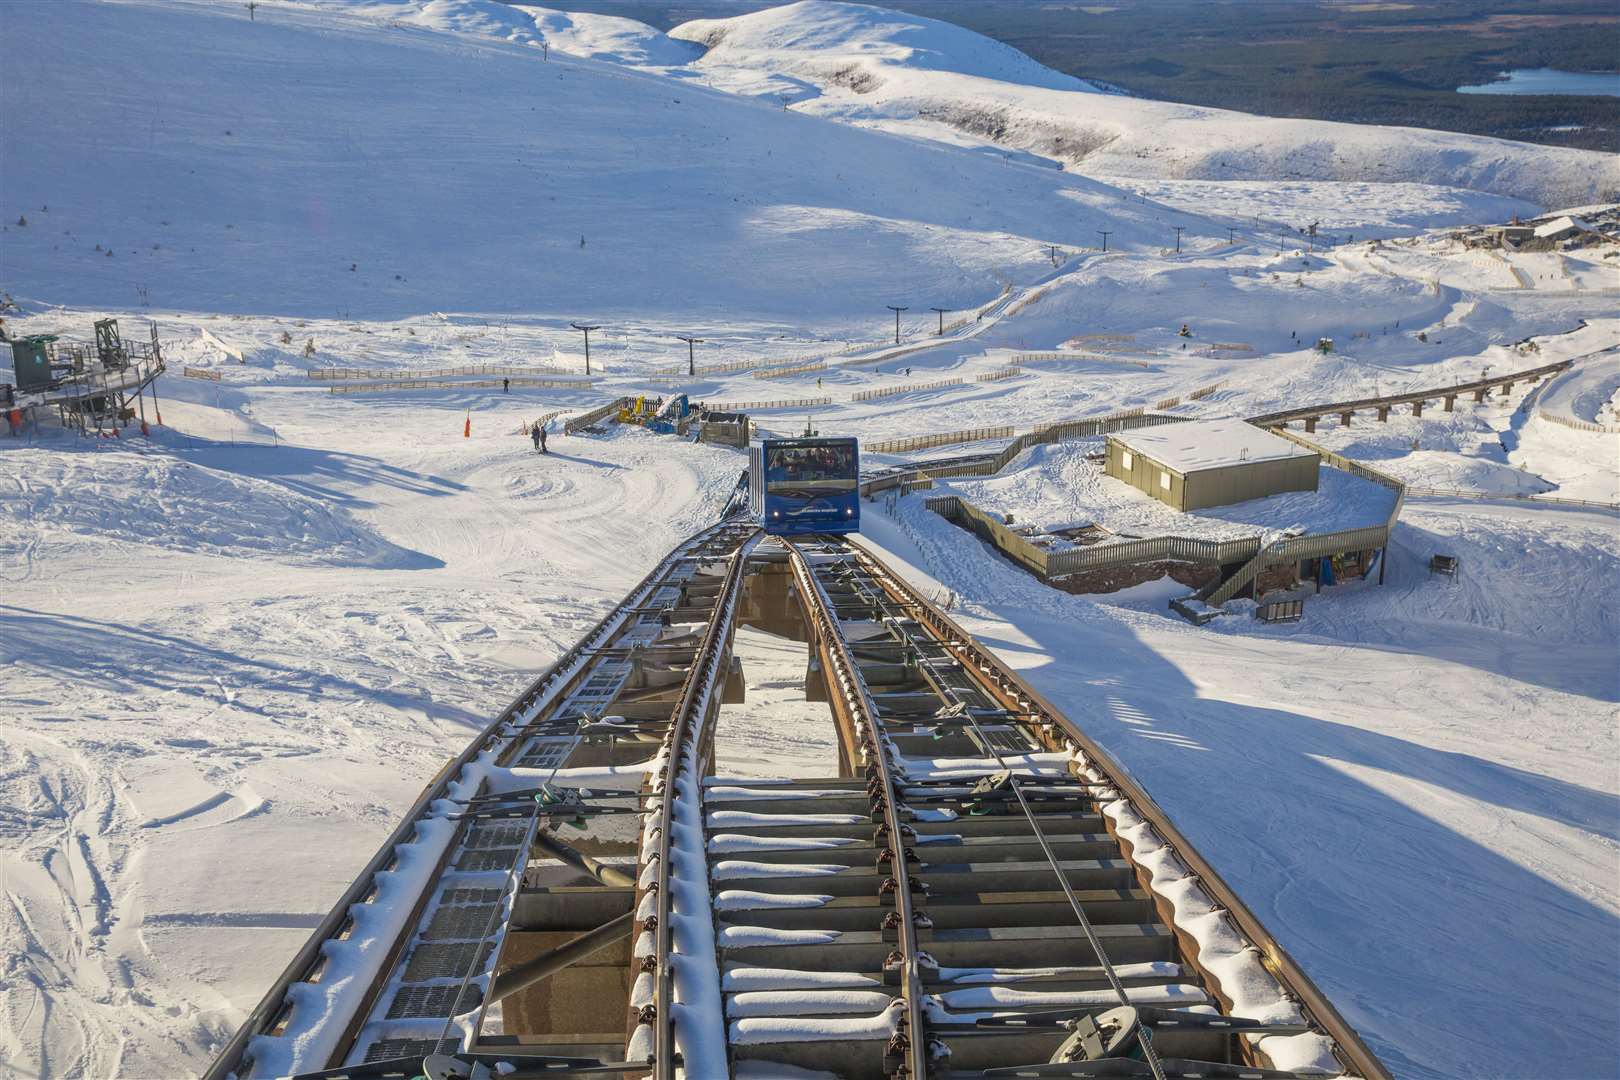 The Cairngorm funicular has not run since Autumn 2018 because of safety concerns about the concrete piers which carry the 1.9 kilometres of track.